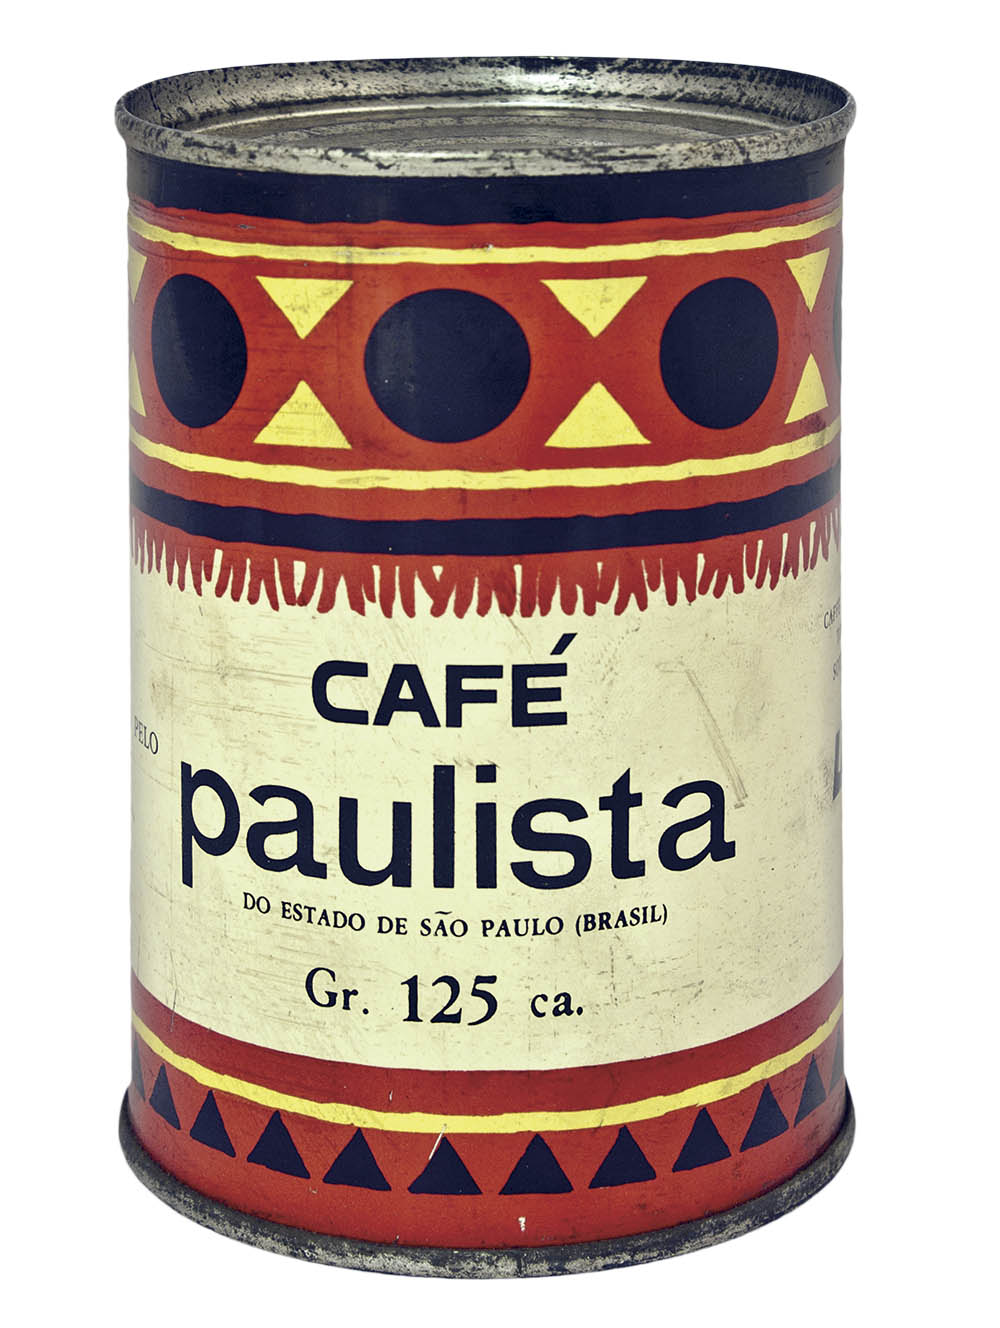 1960's coffee can